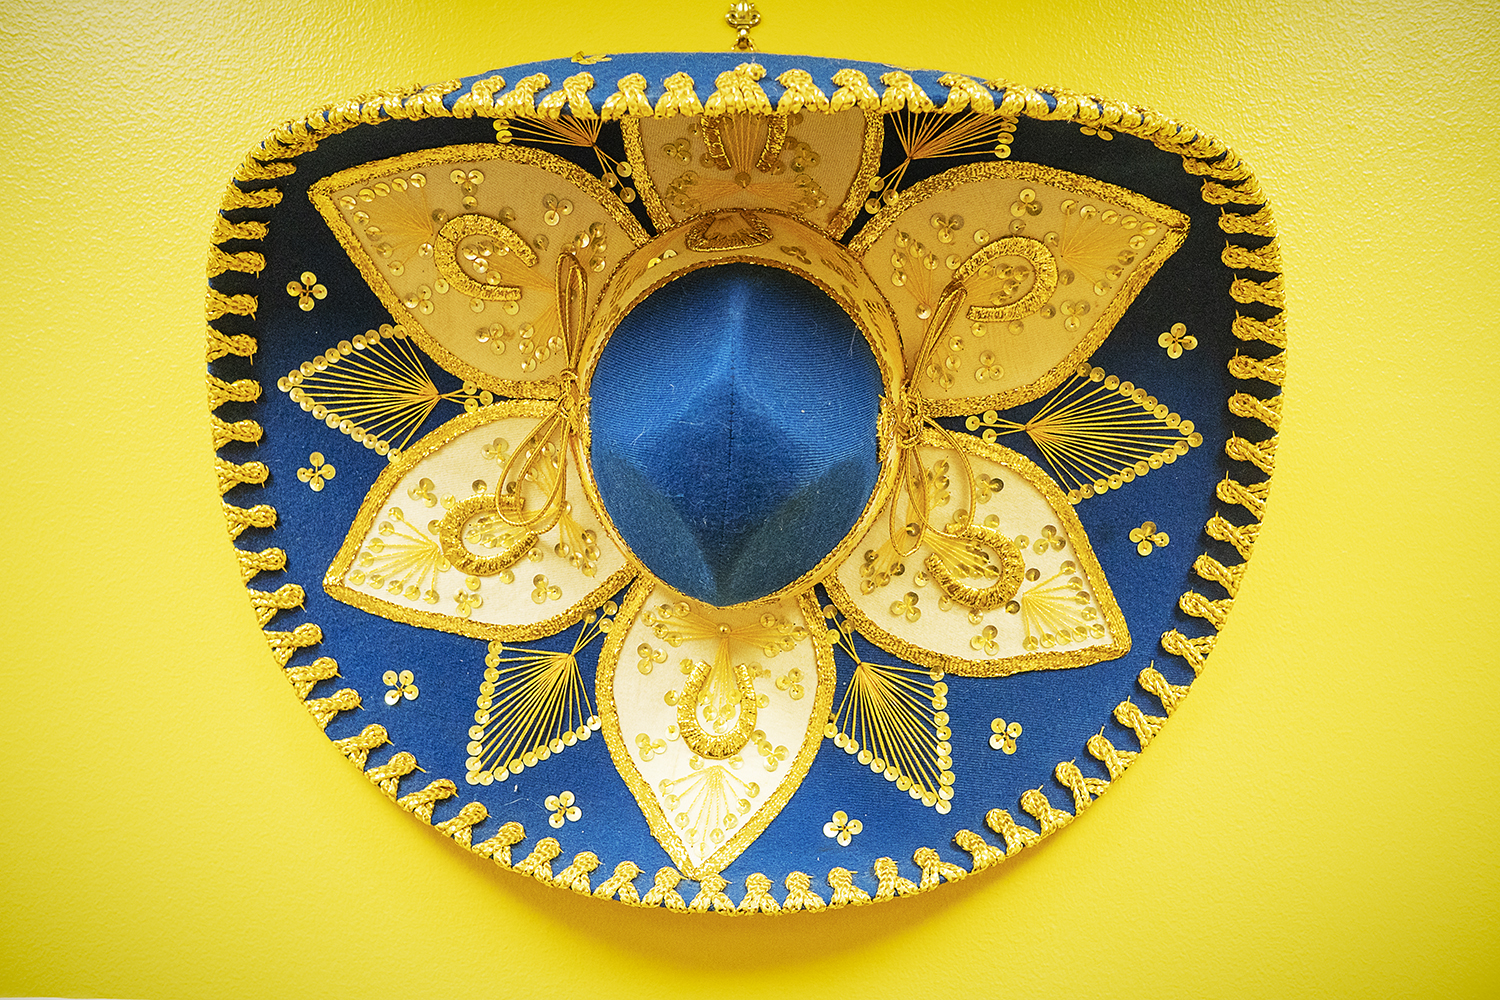 Flint, MI - Tuesday, June 19, 2018: A blue and maize sombrero hangs on the wall of the technology lab at the Hispanic Technology and Community Center of Flint.